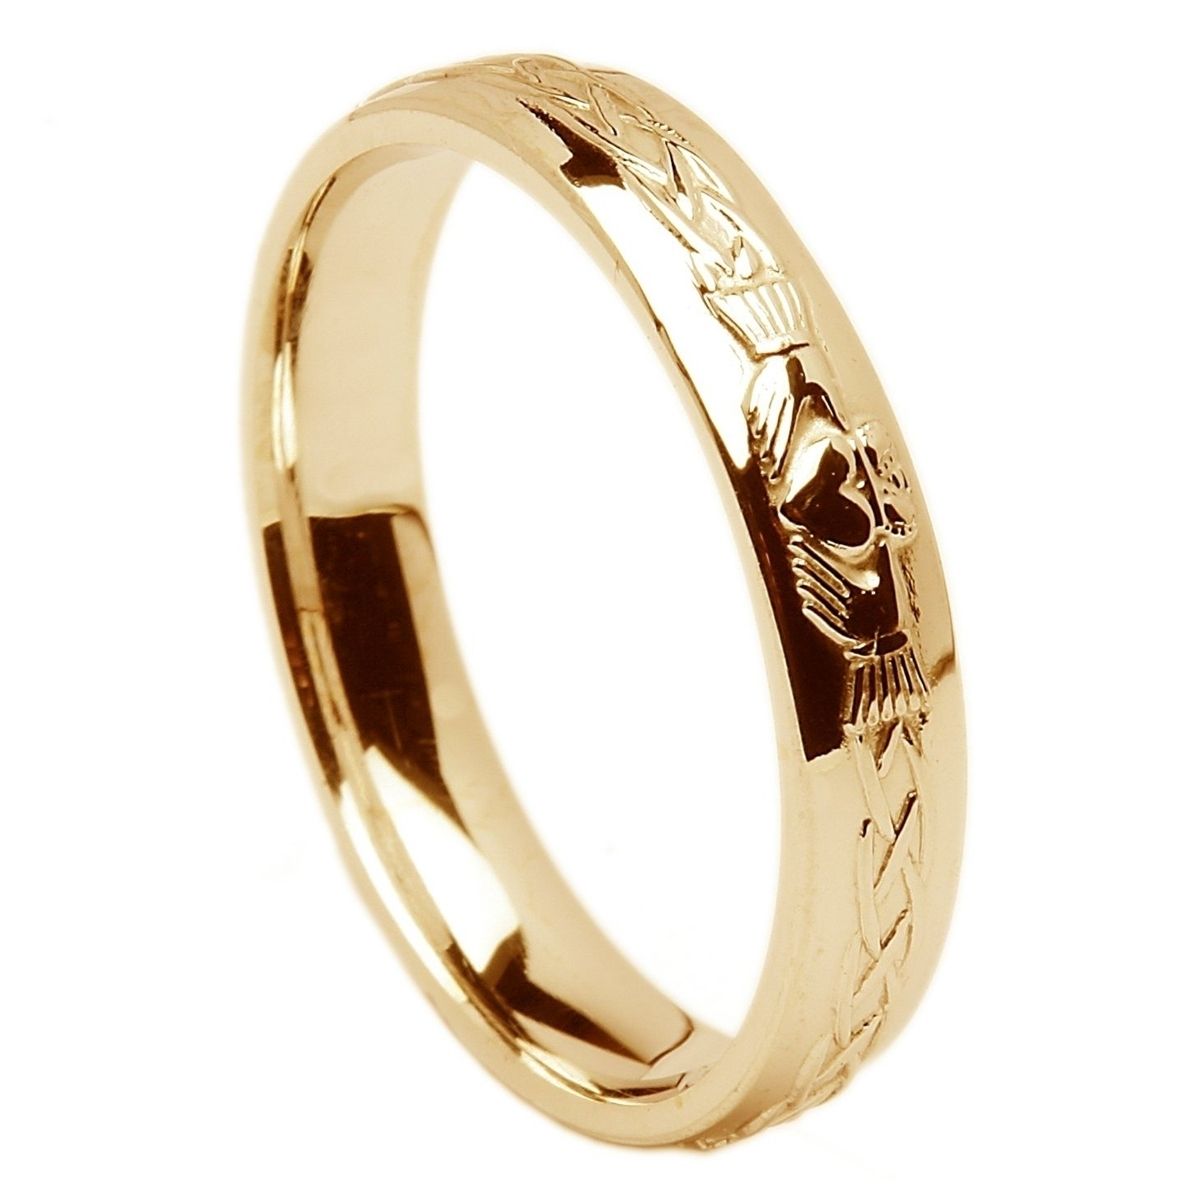 10k Yellow Gold Men's Claddagh Celtic Wedding Ring  (View 11 of 15)